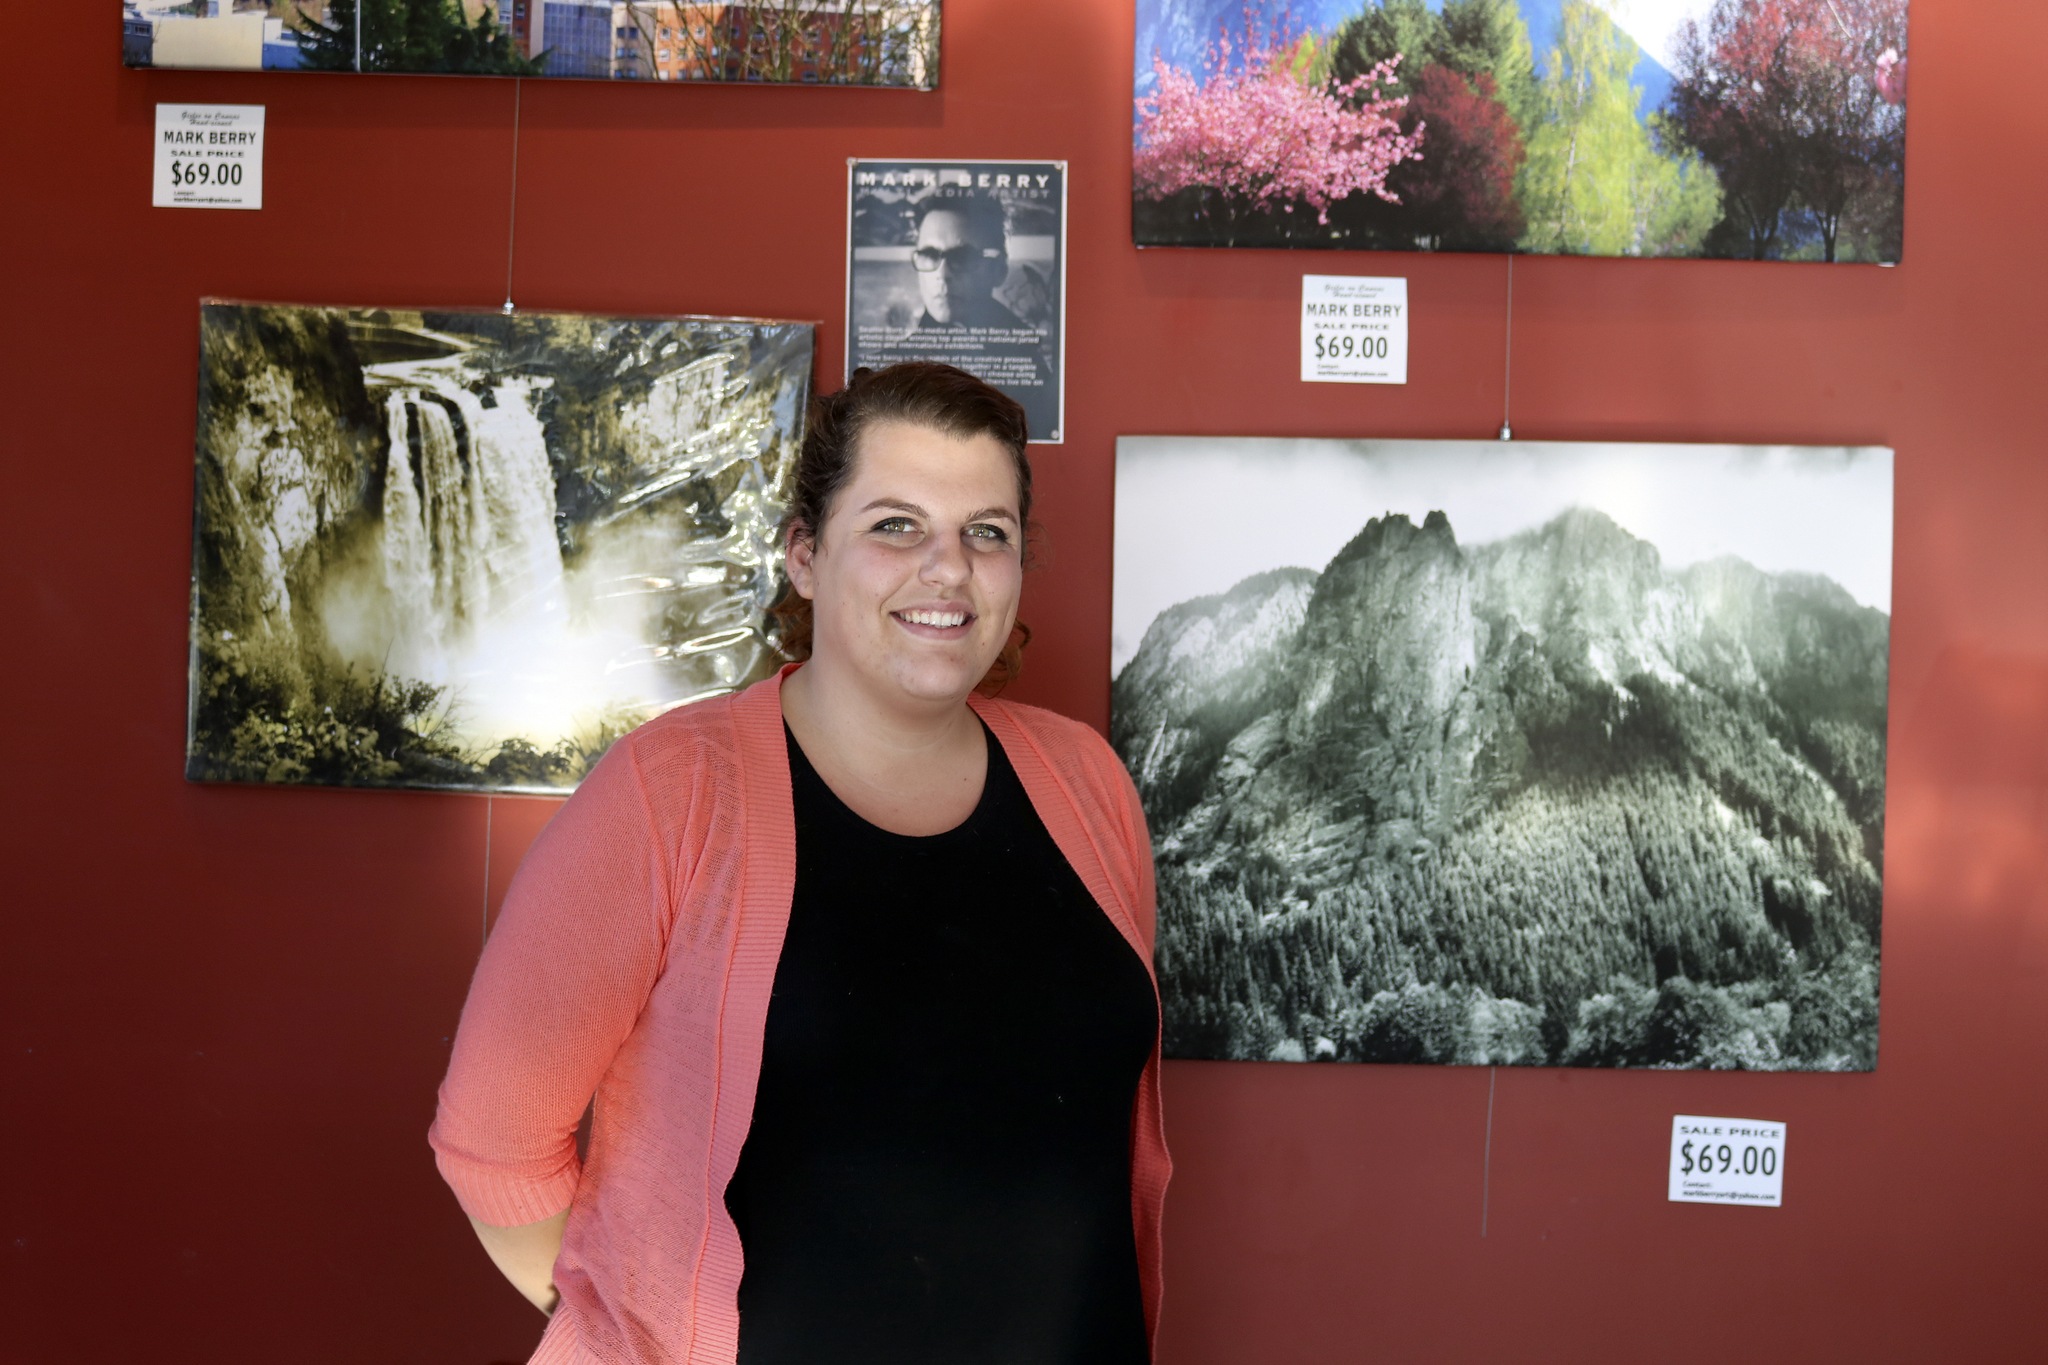 Evan Pappas/Staff PhotoNorth Bend Visitor Information Center’s new manager Jessica Tate.